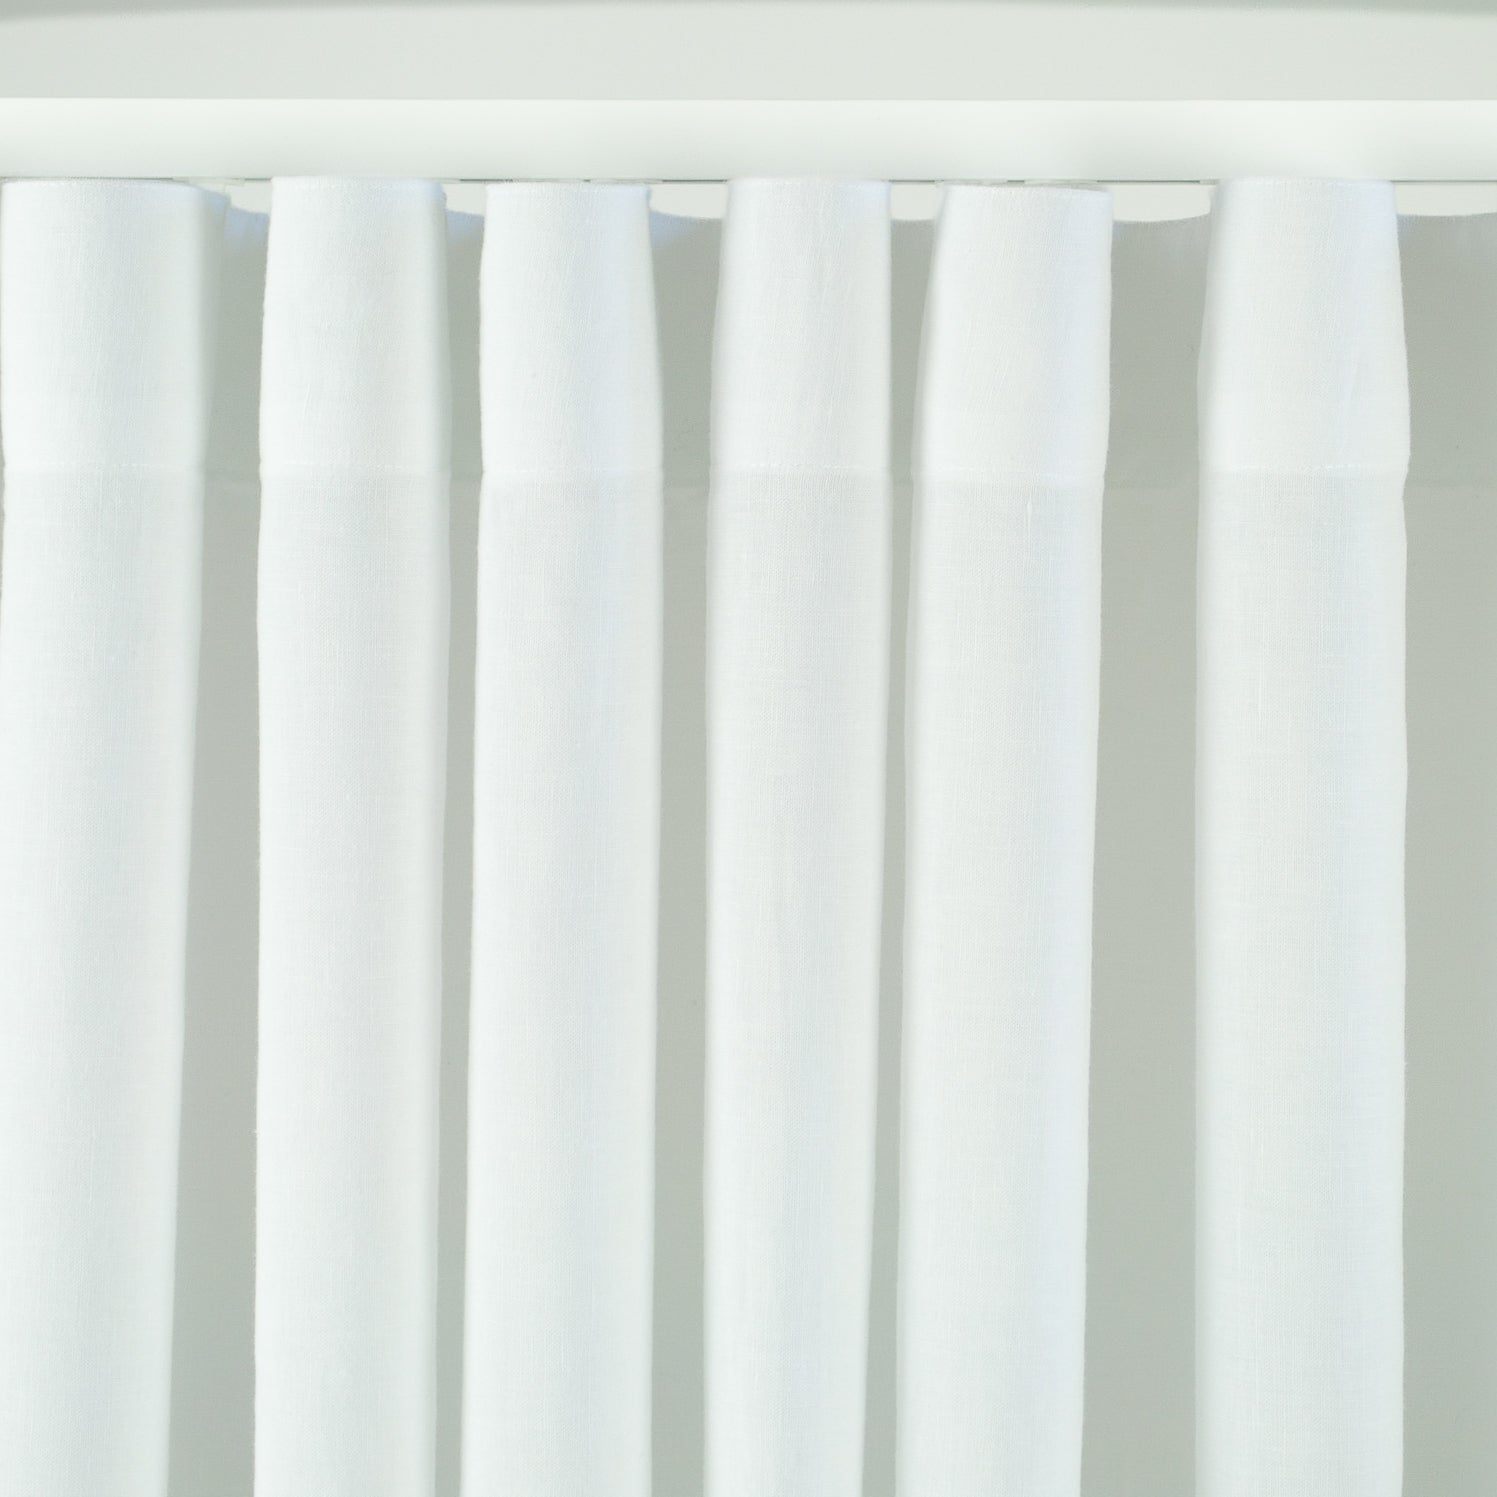 Wavefold curtain, Color: White